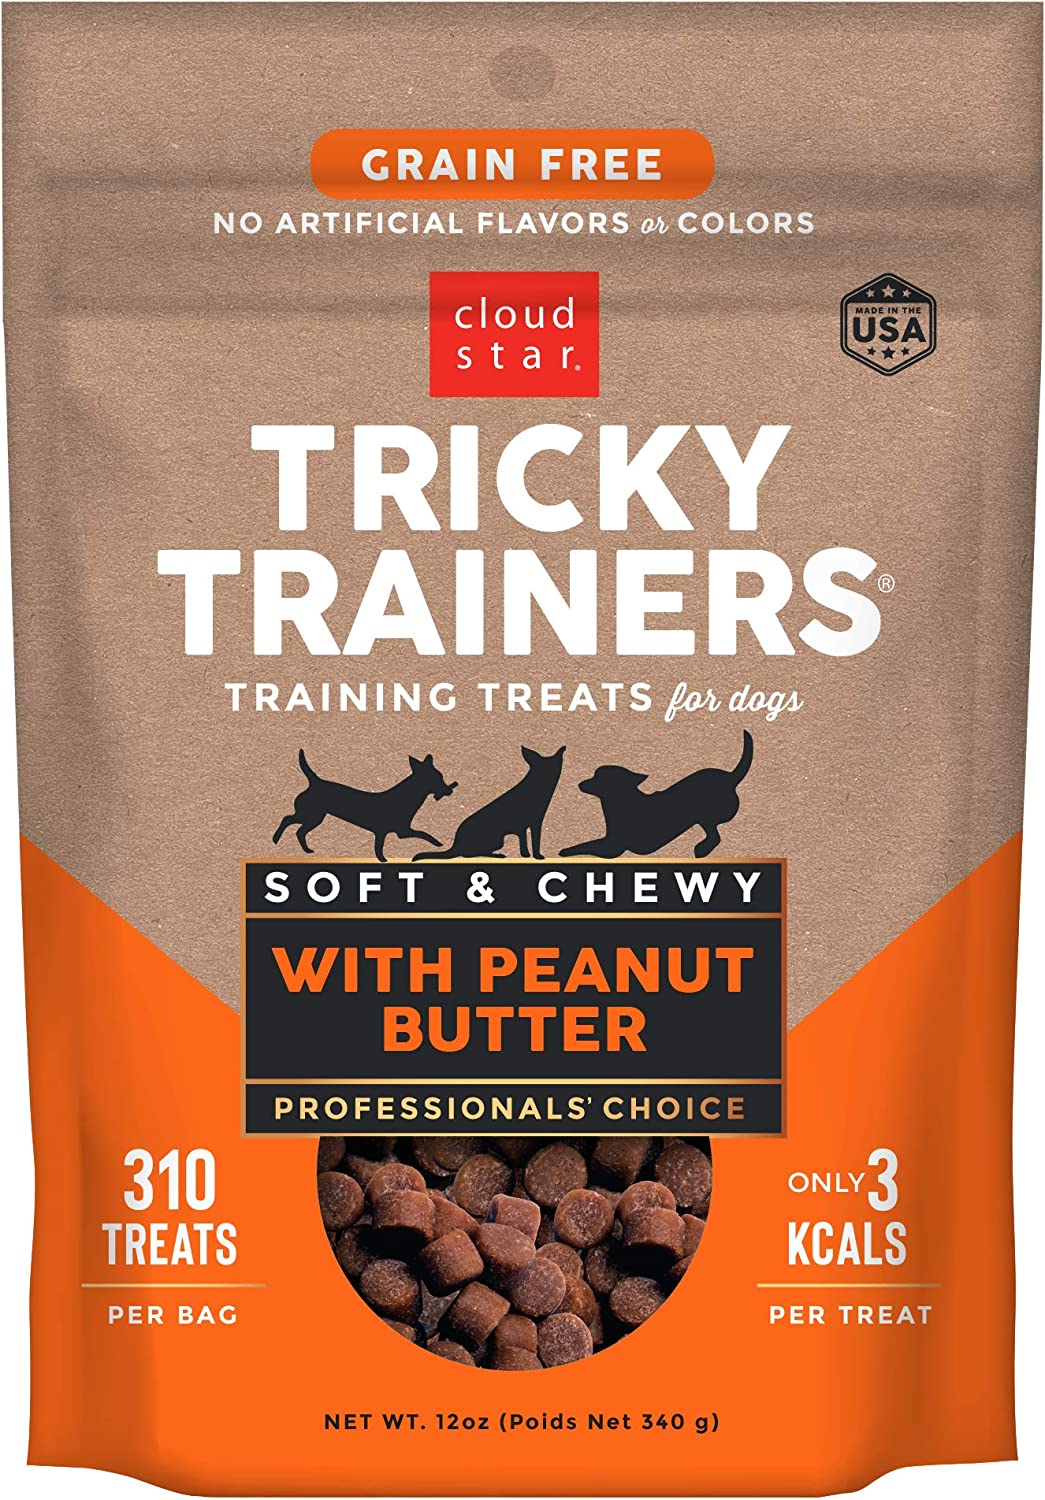 Cloud Star Tricky Trainers Chewy Peanut Butter & Grain Free, Low Calorie Dog Training Treats, Baked in the USA (12 oz)